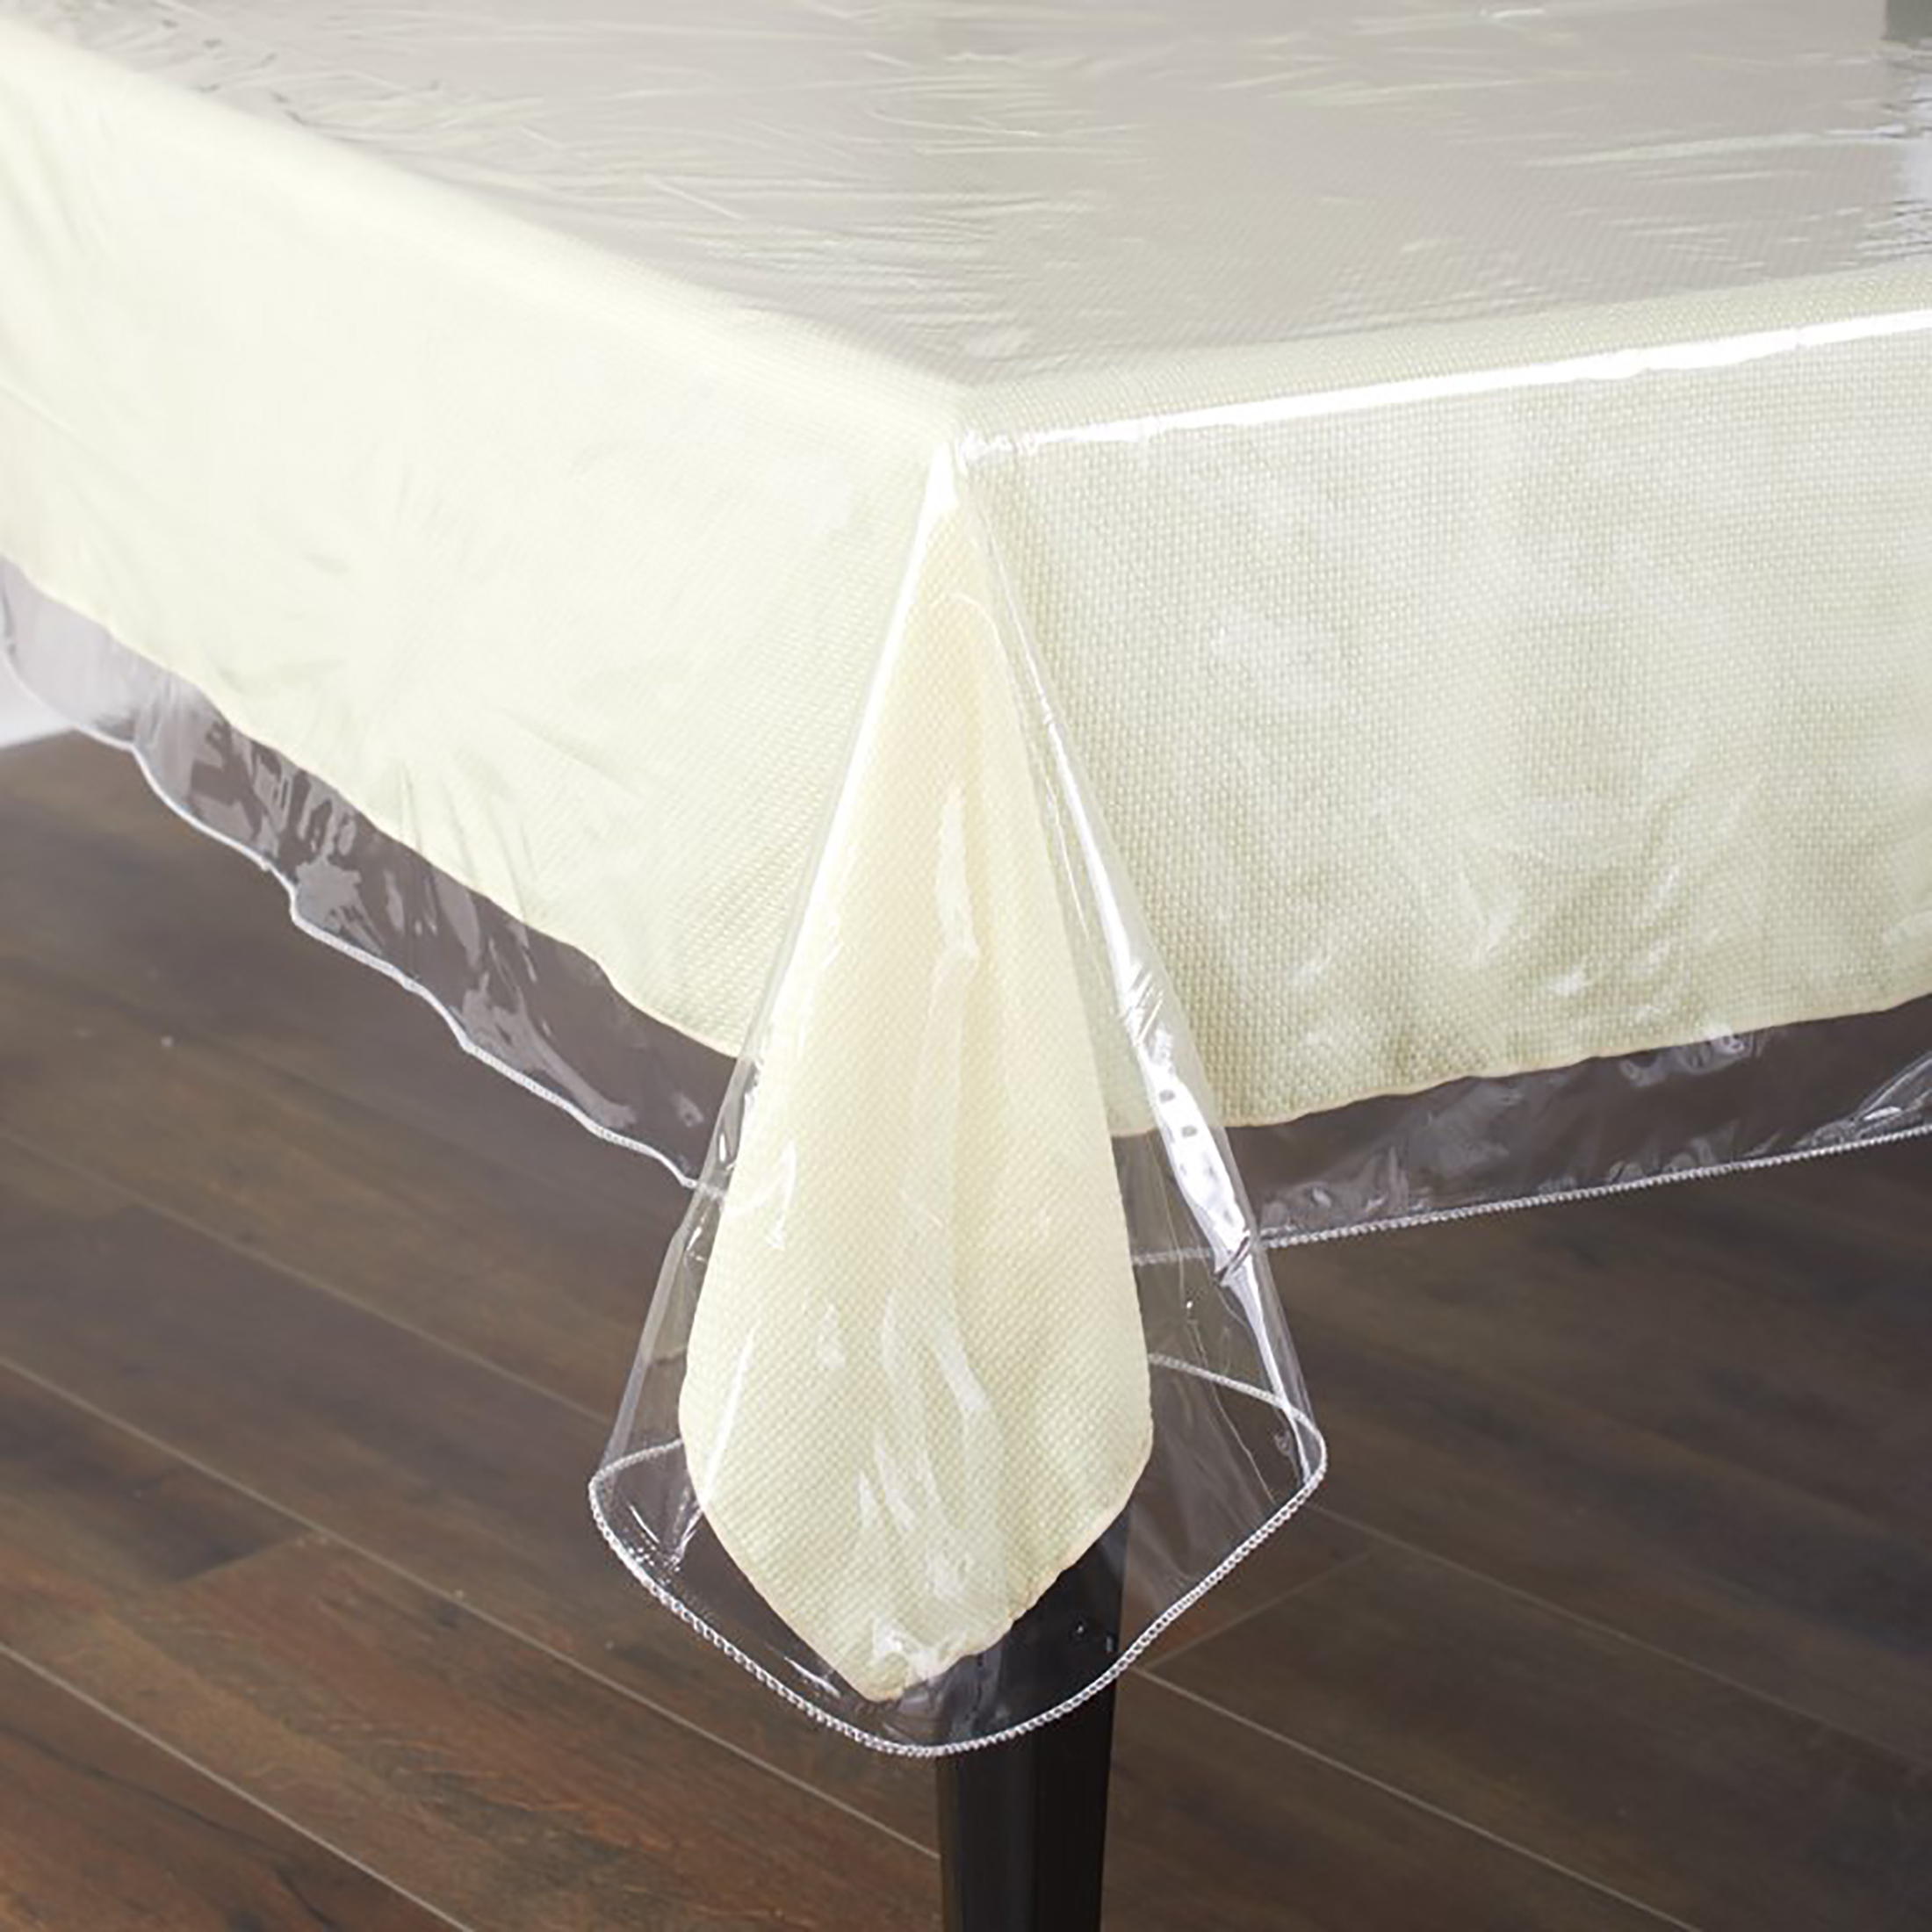 Waterproof Window Clear Vinyl Tablecloth Protector Oblong - 70R